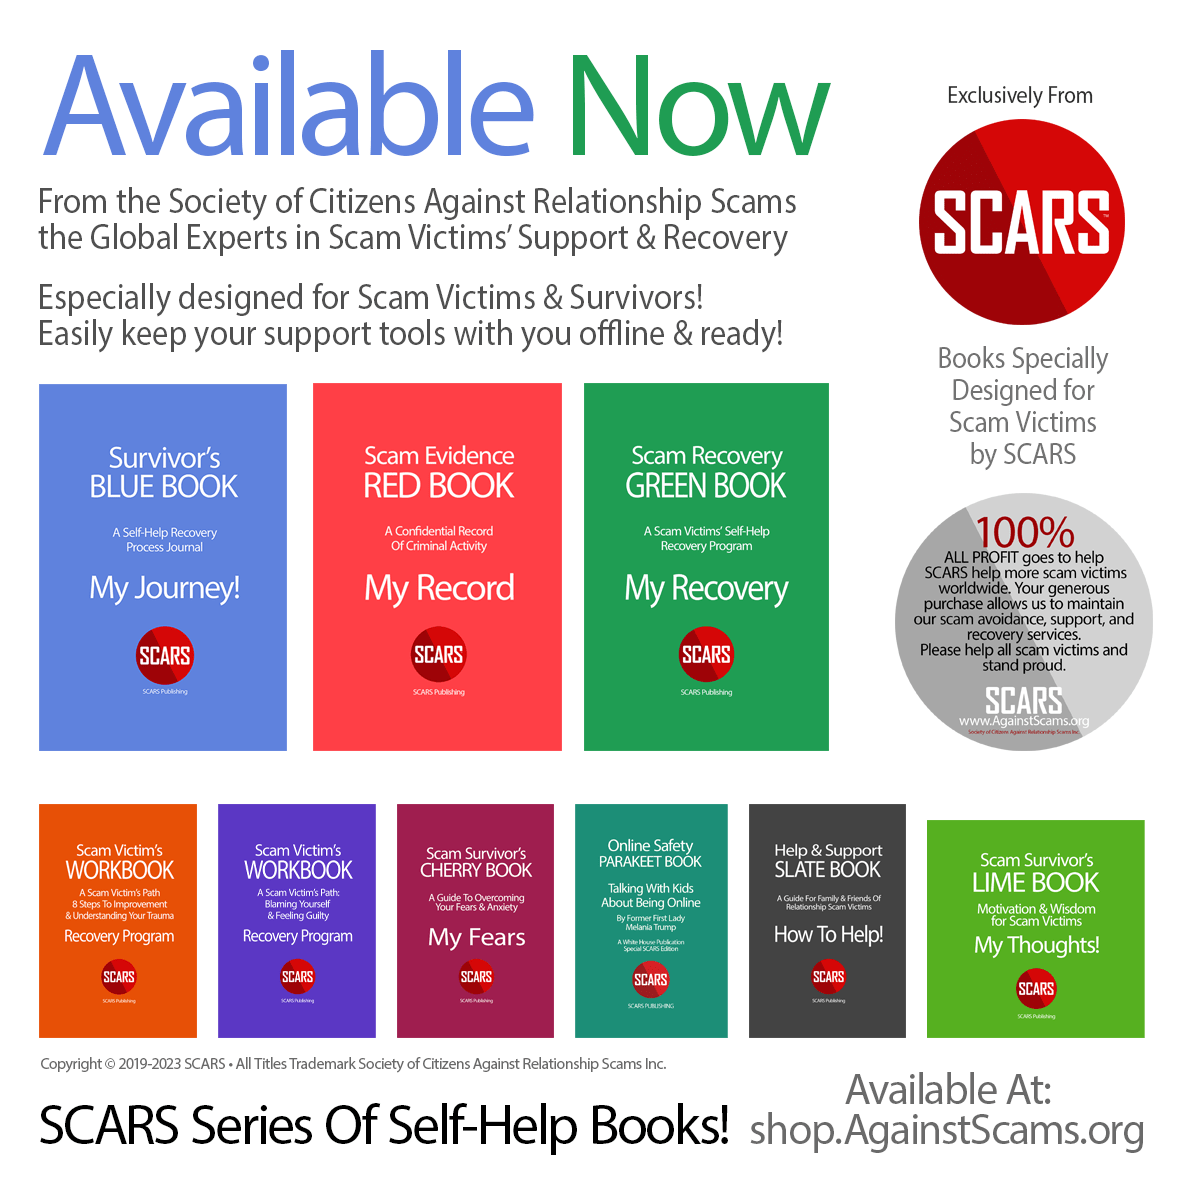 SCARS Self-Help Books Also Available at https://shop.AgainstScams.org